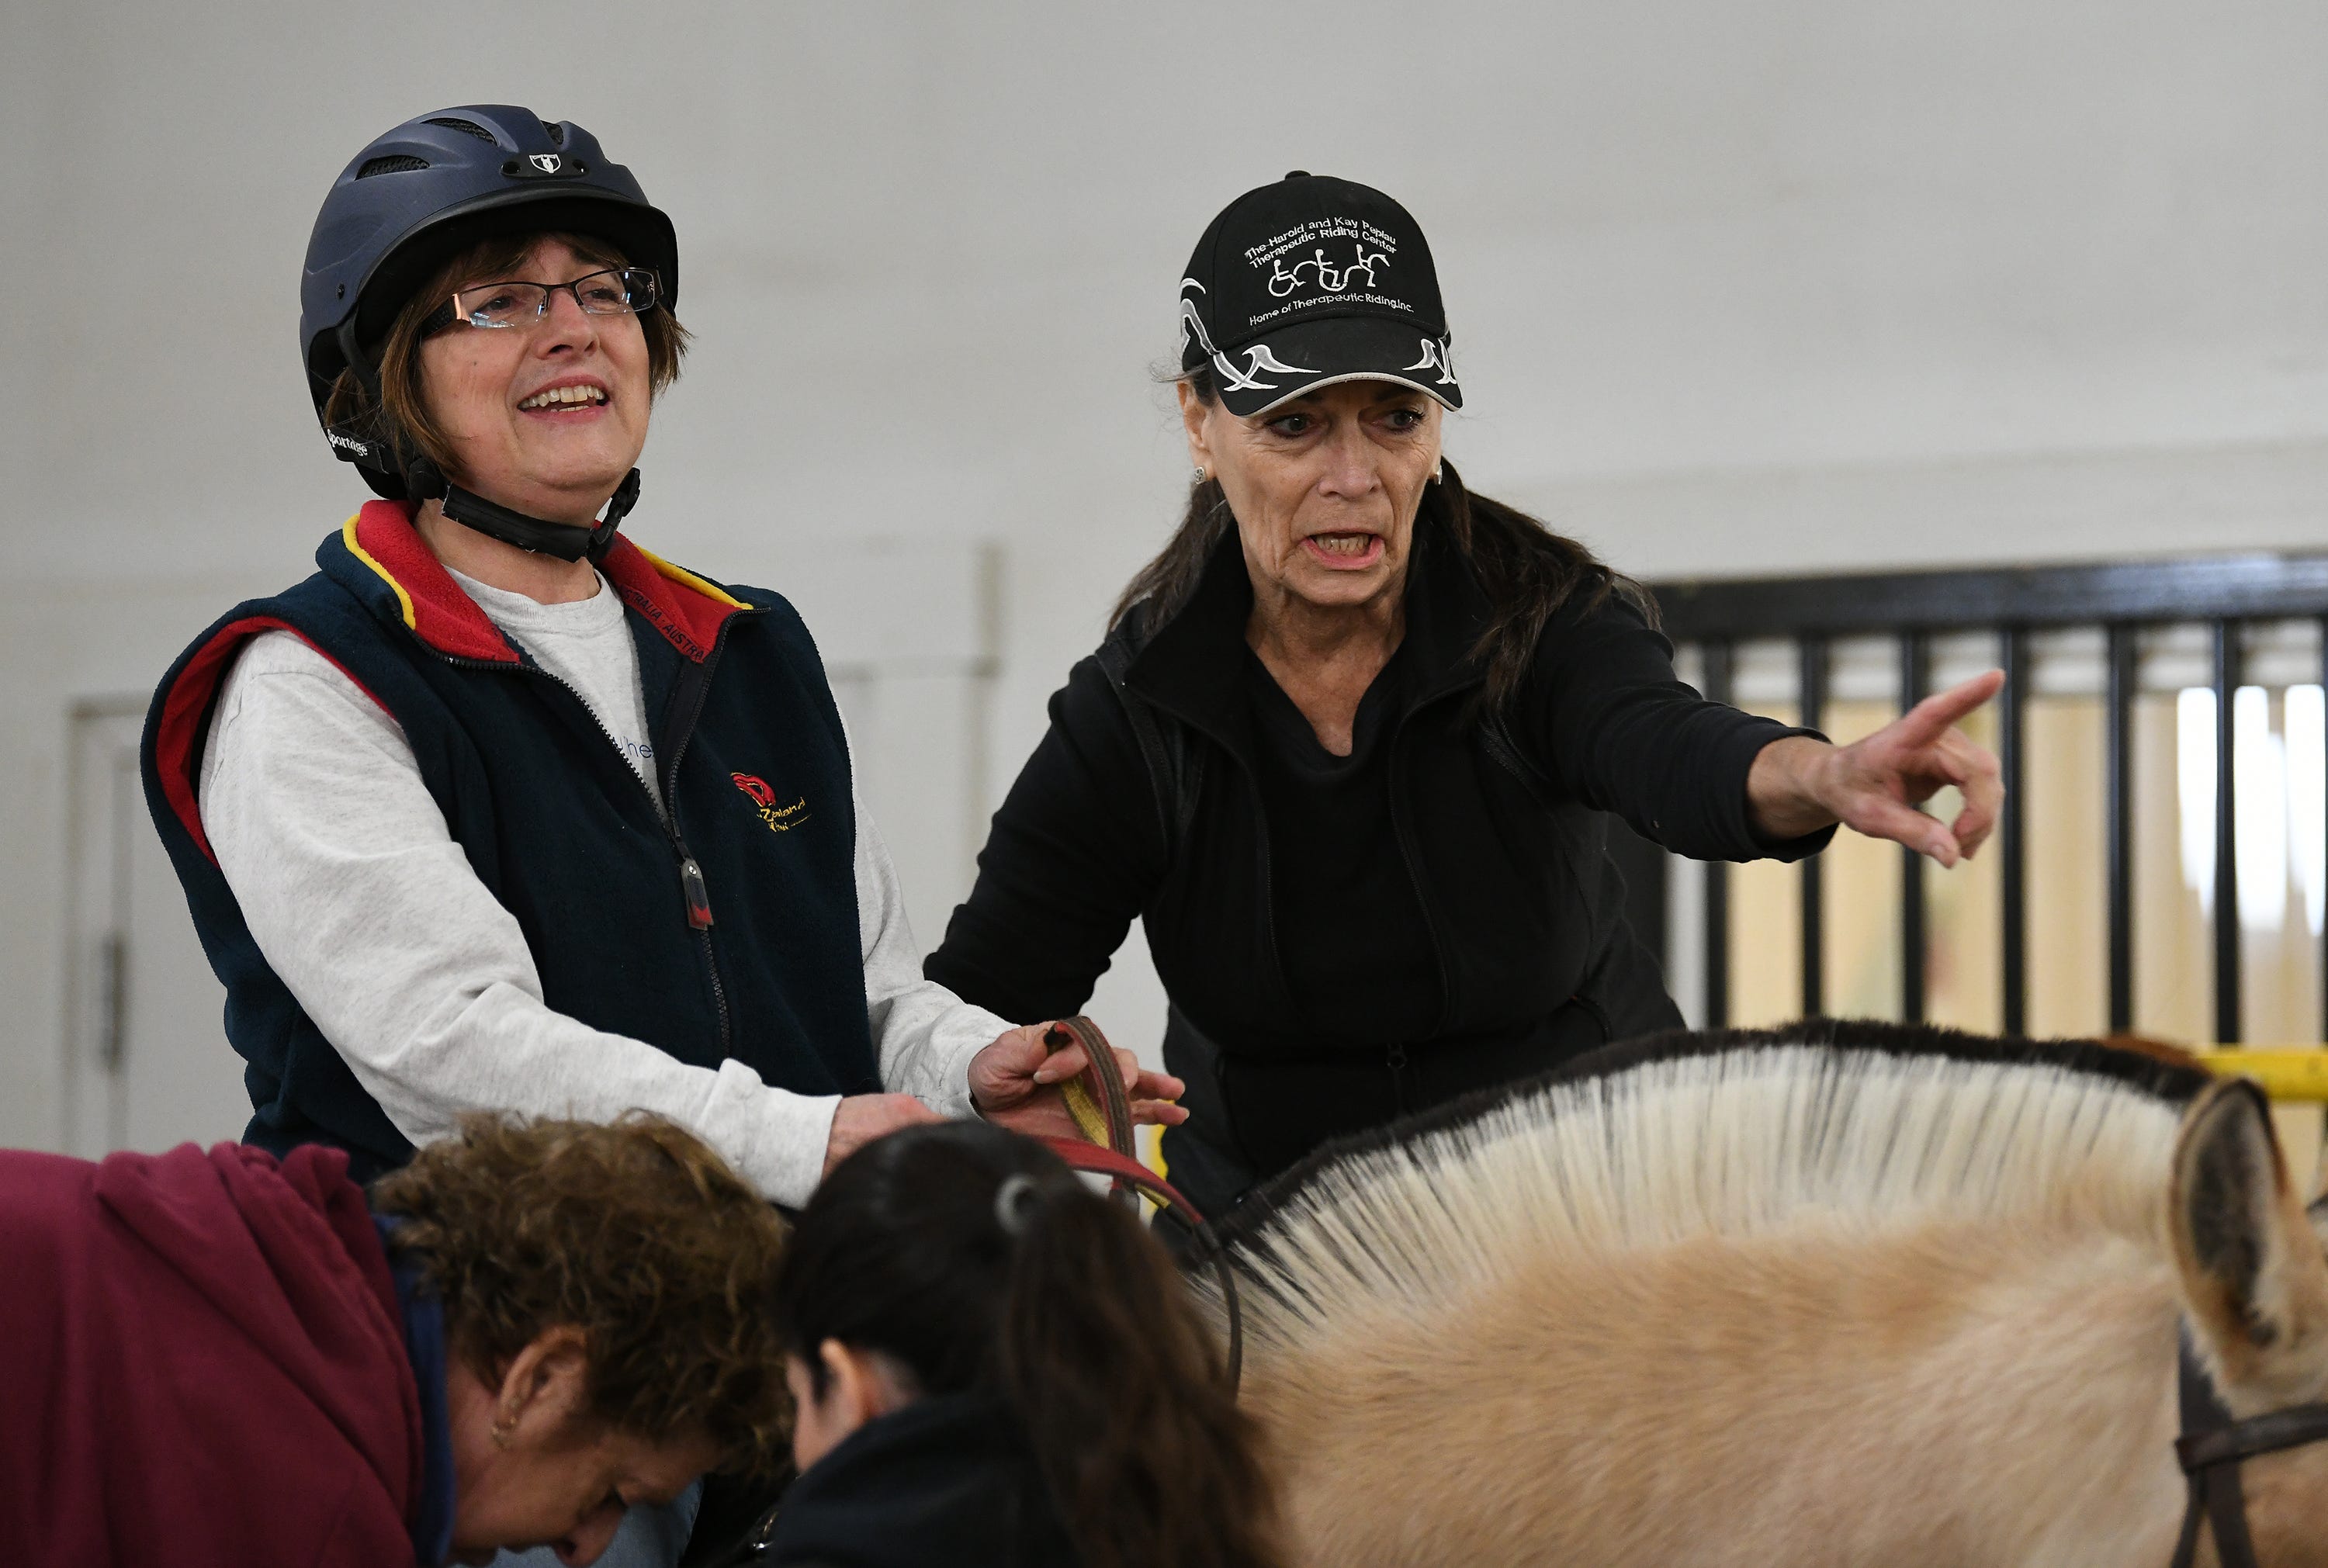 Jan Vescelius, right, Program Director and Head Instructor of Therapeutic Riding Inc., helps rider Deb Swartz onto the horse Sigbjorn, Tuesday morning in Ann Arbor. Therapeutic Riding Inc. just celebrated its 35th Anniversary.